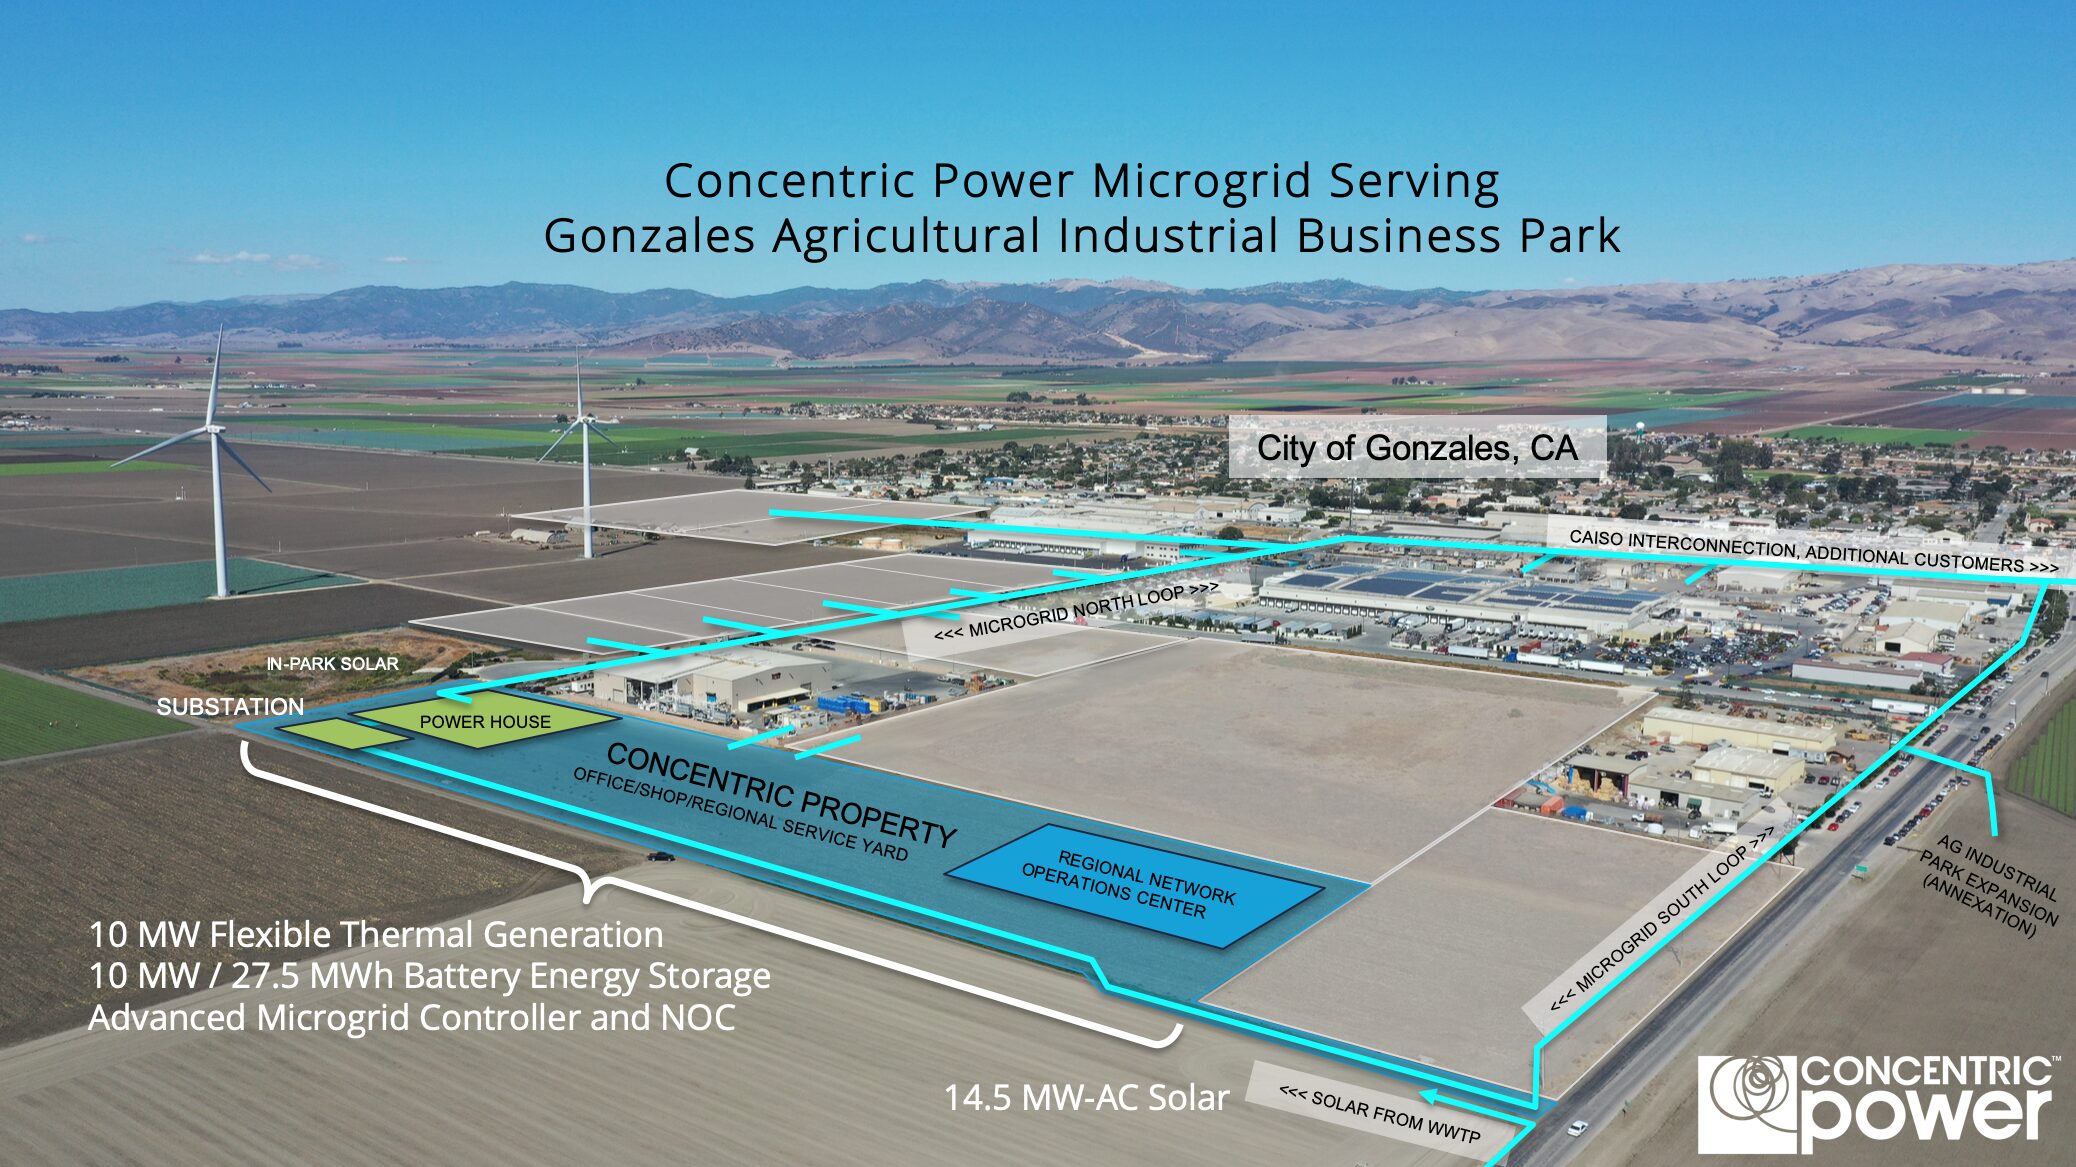 Horn radar coping Gonzales-Concentric Microgrid Program Area - Drone Schematic 201008_final -  Concentric Power